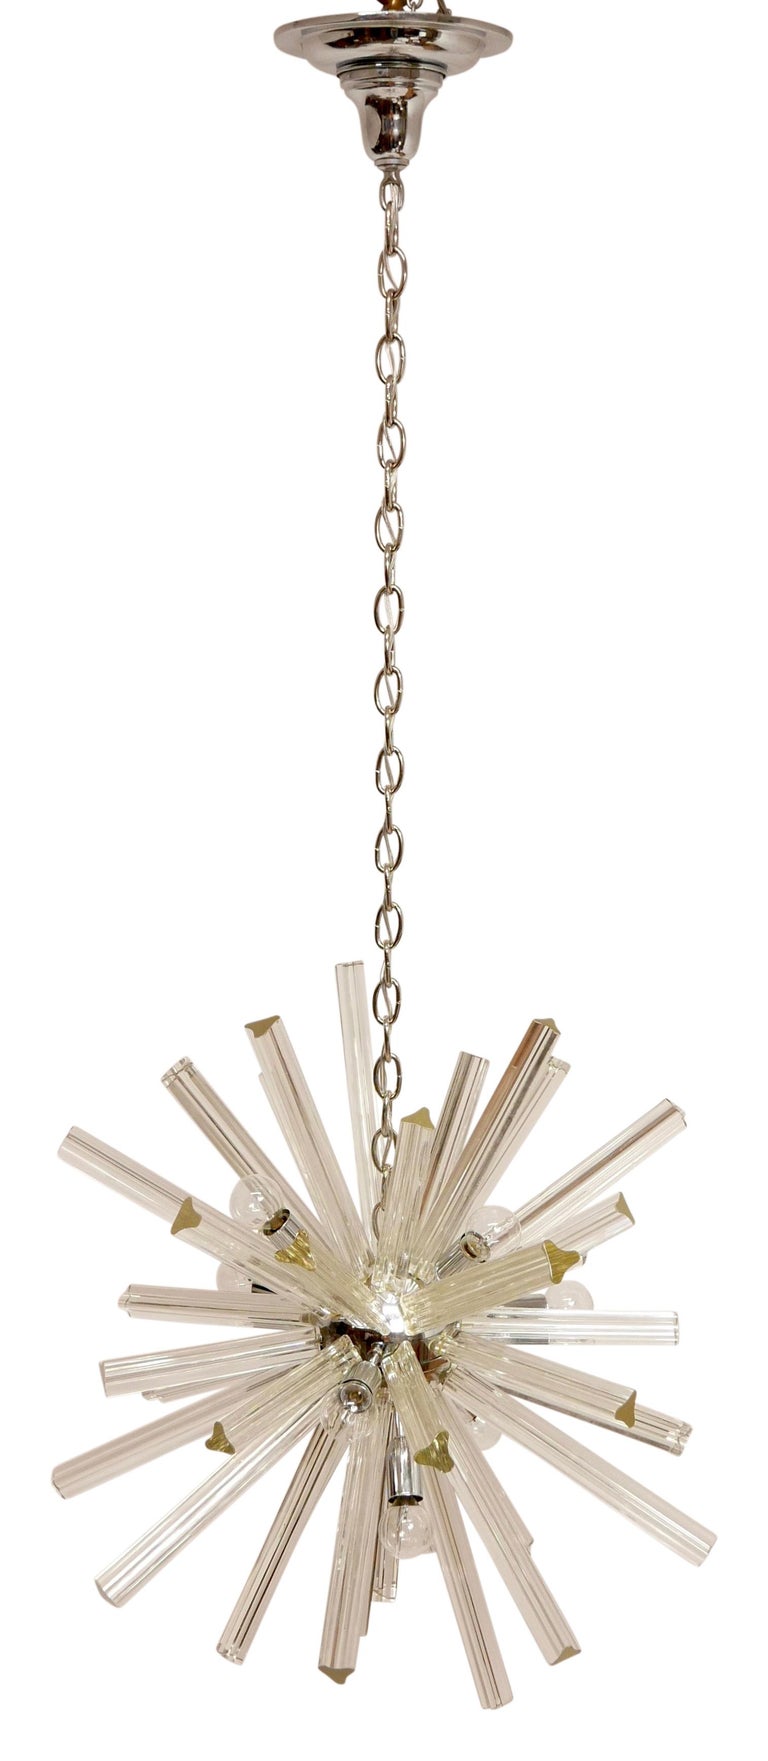 An unusual nine light starburst Sputnik style crystal chandelier, having two differing lengths of crystals in a trideri shape with the sockets interspersed among the crystal rods. Heavy chrome plating on the steel covered sockets and frame